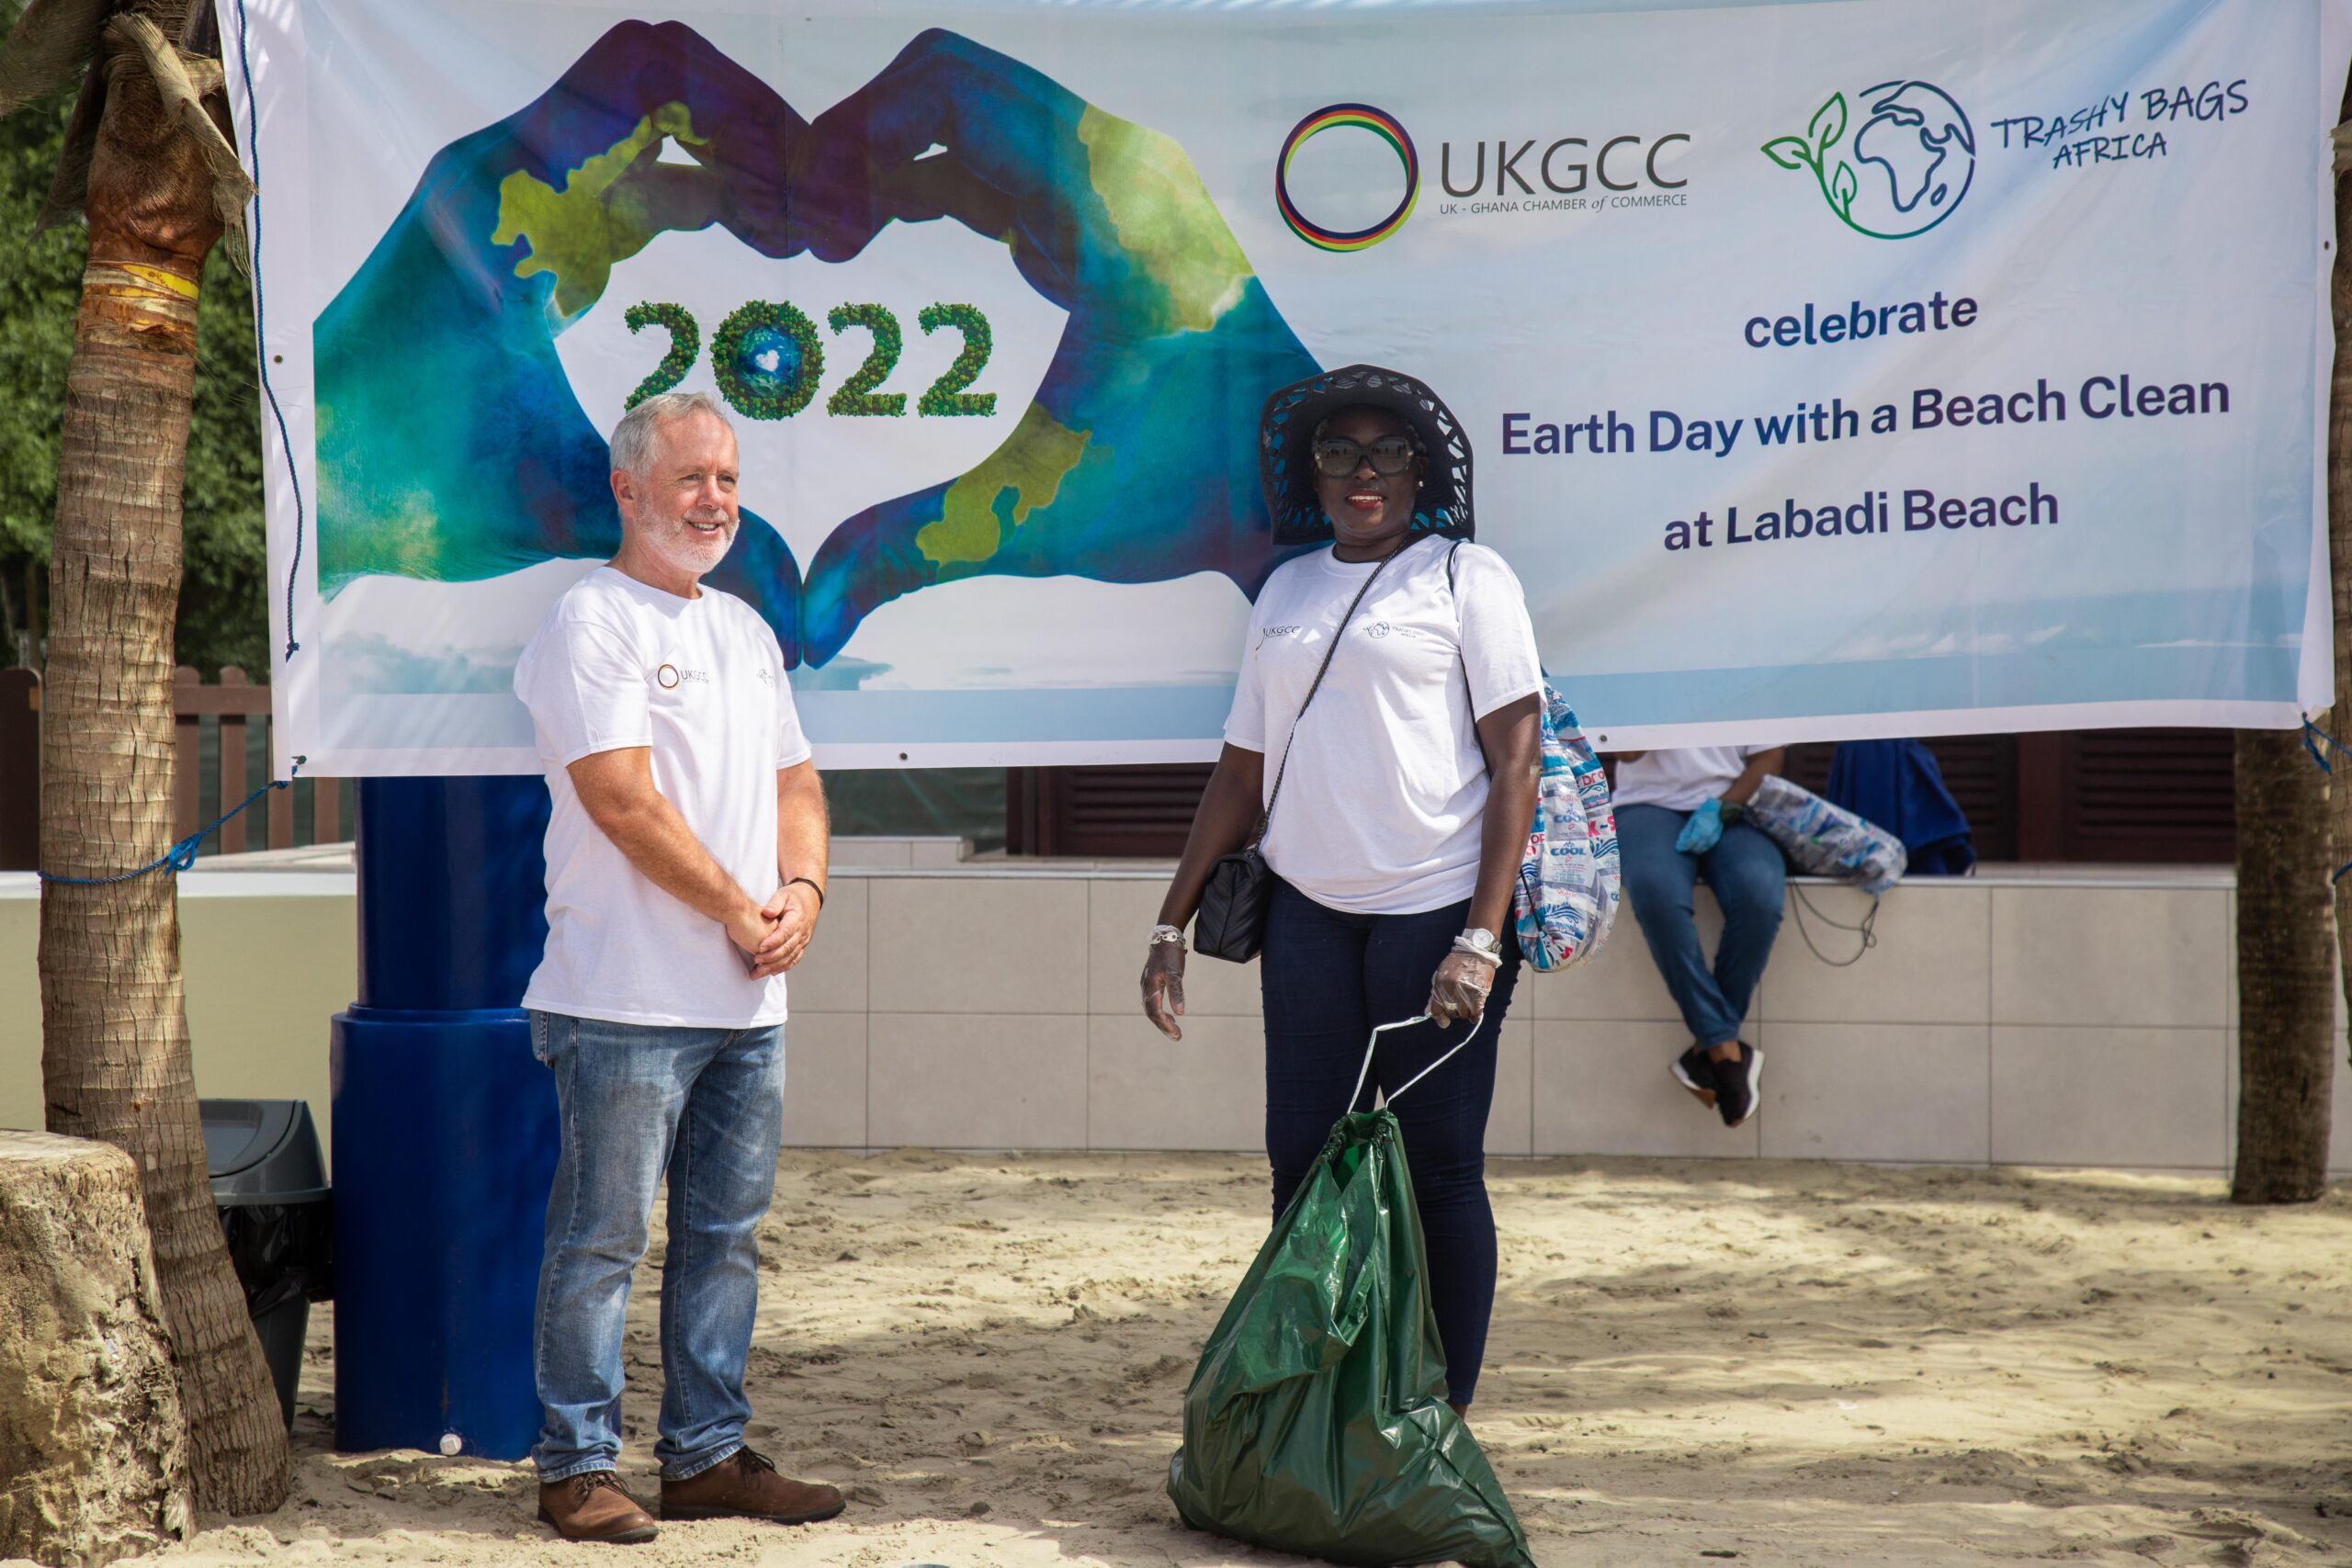 UKGCC & Trashy Bags Africa’s Earth Day Beach Clean-up Exercise